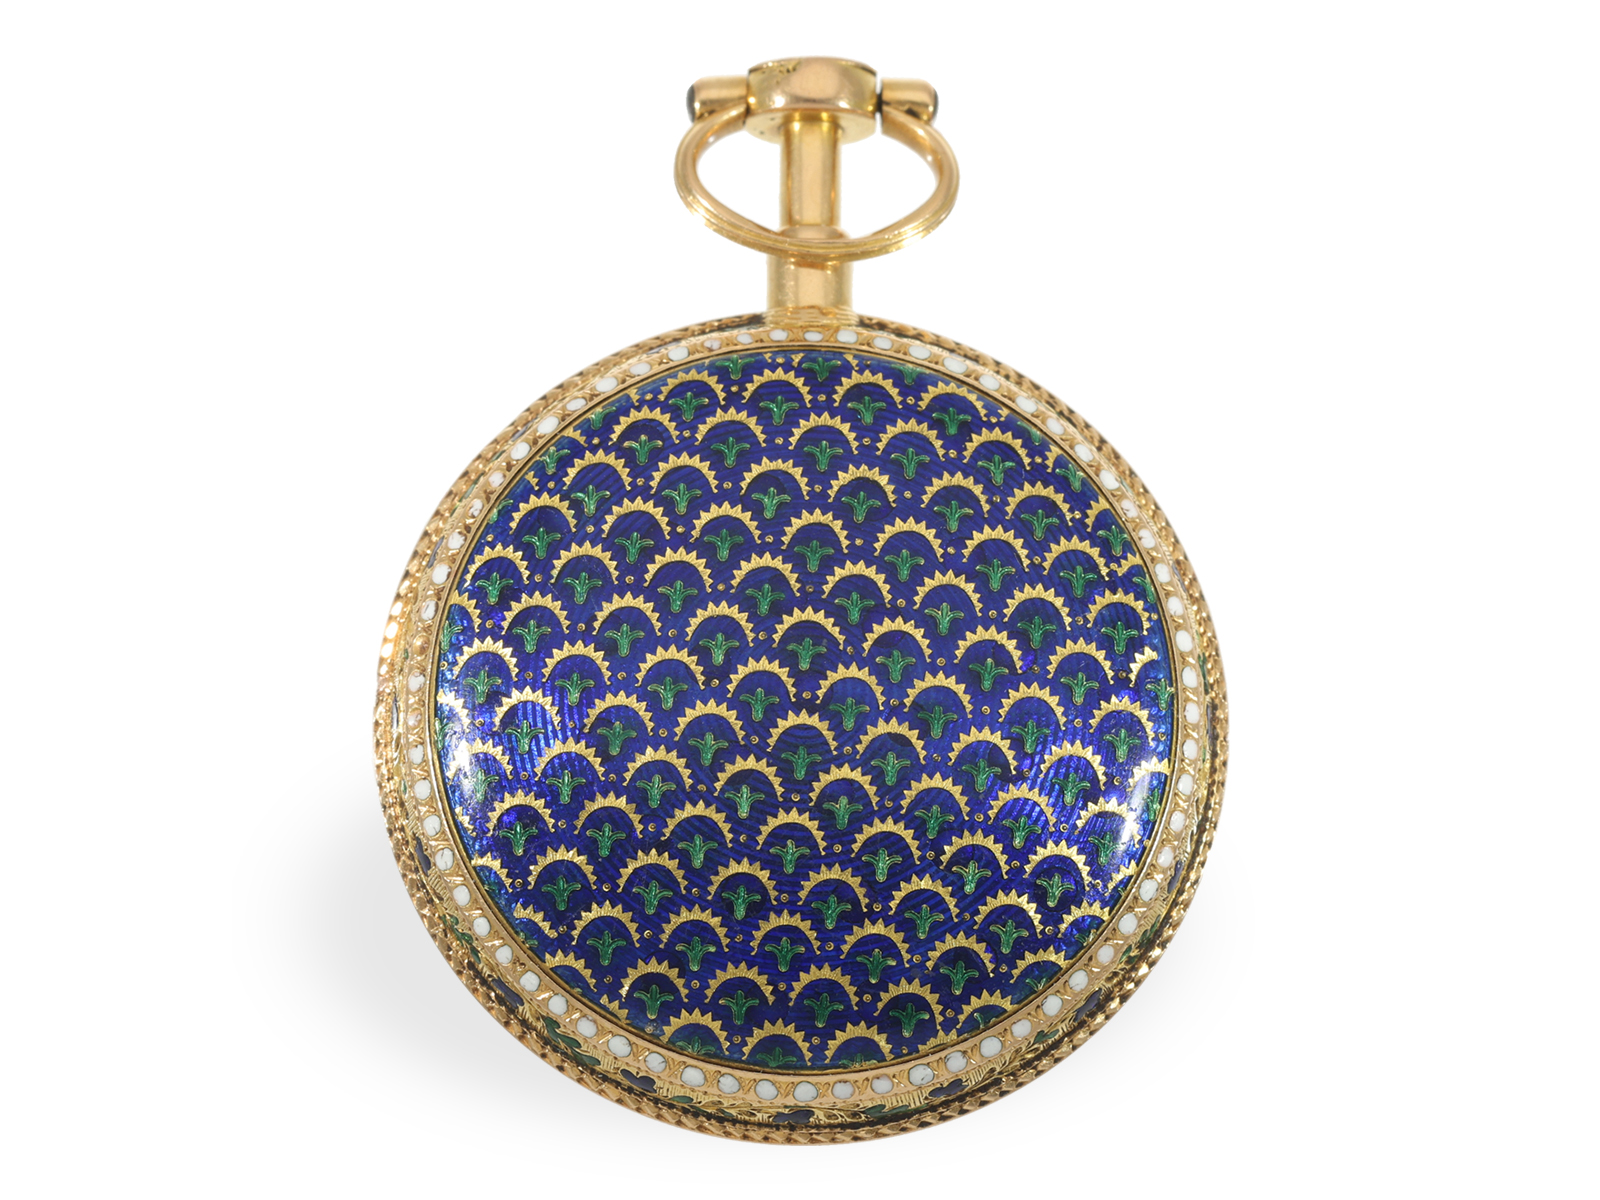 Pocket watch: very fine gold/enamel verge watch with intricate paillone enamelling, Guenoux a Paris, - Image 2 of 5